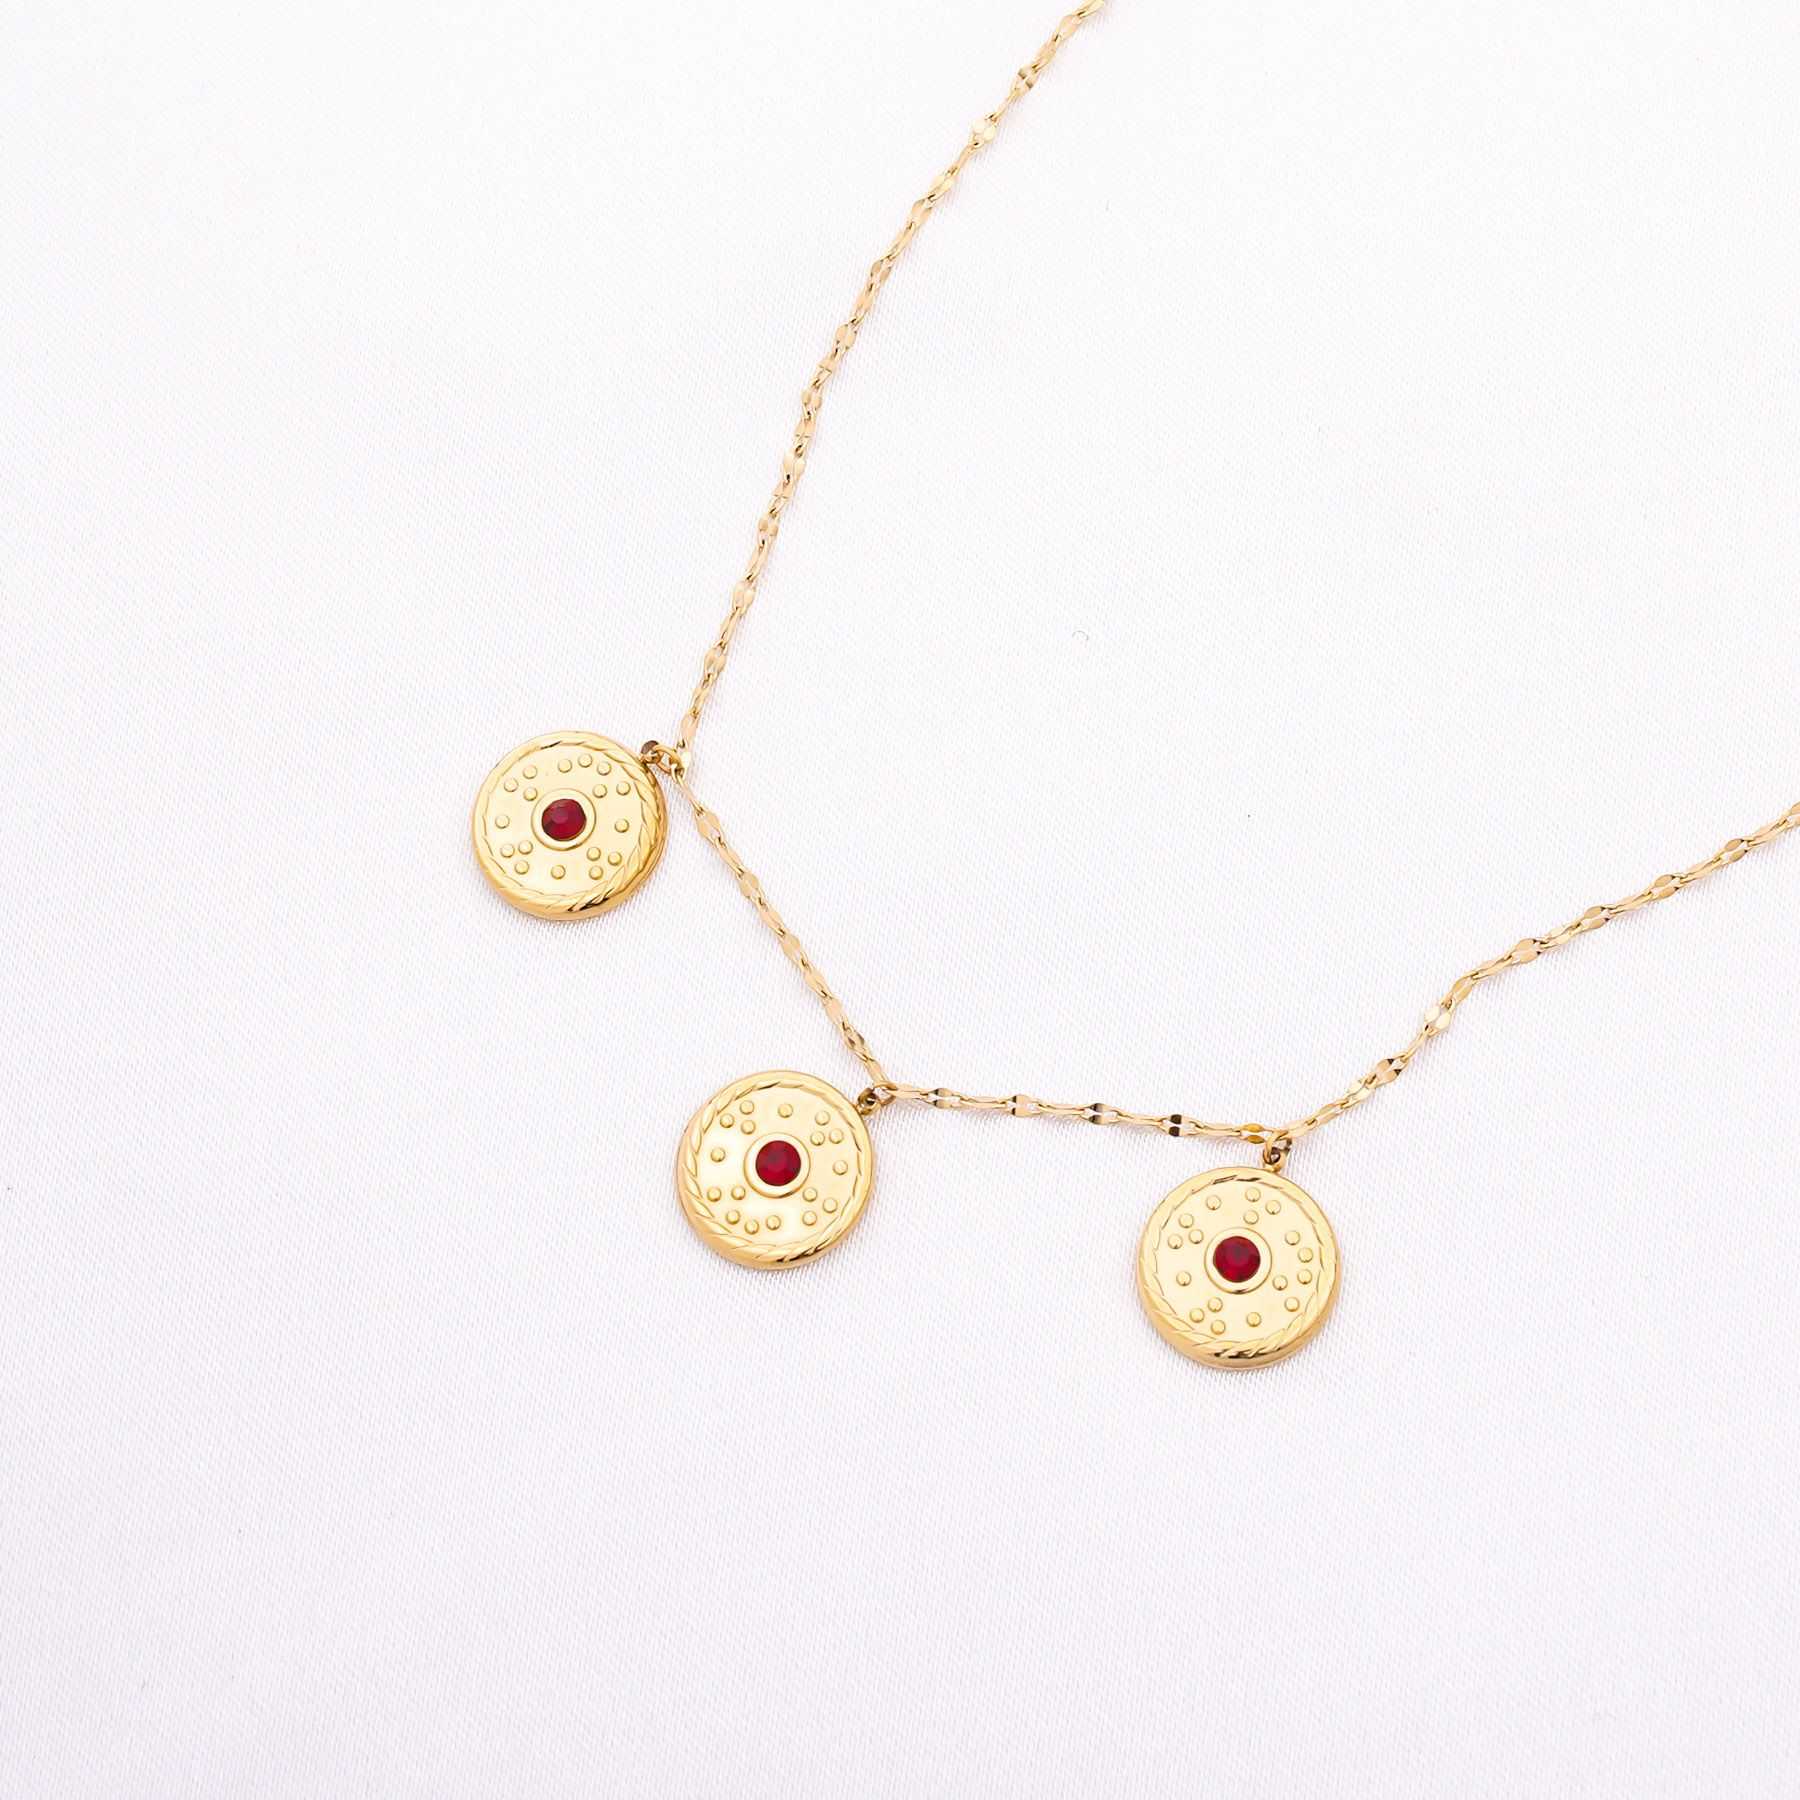 FAMILIA NECKLACE - GOLD & RED 